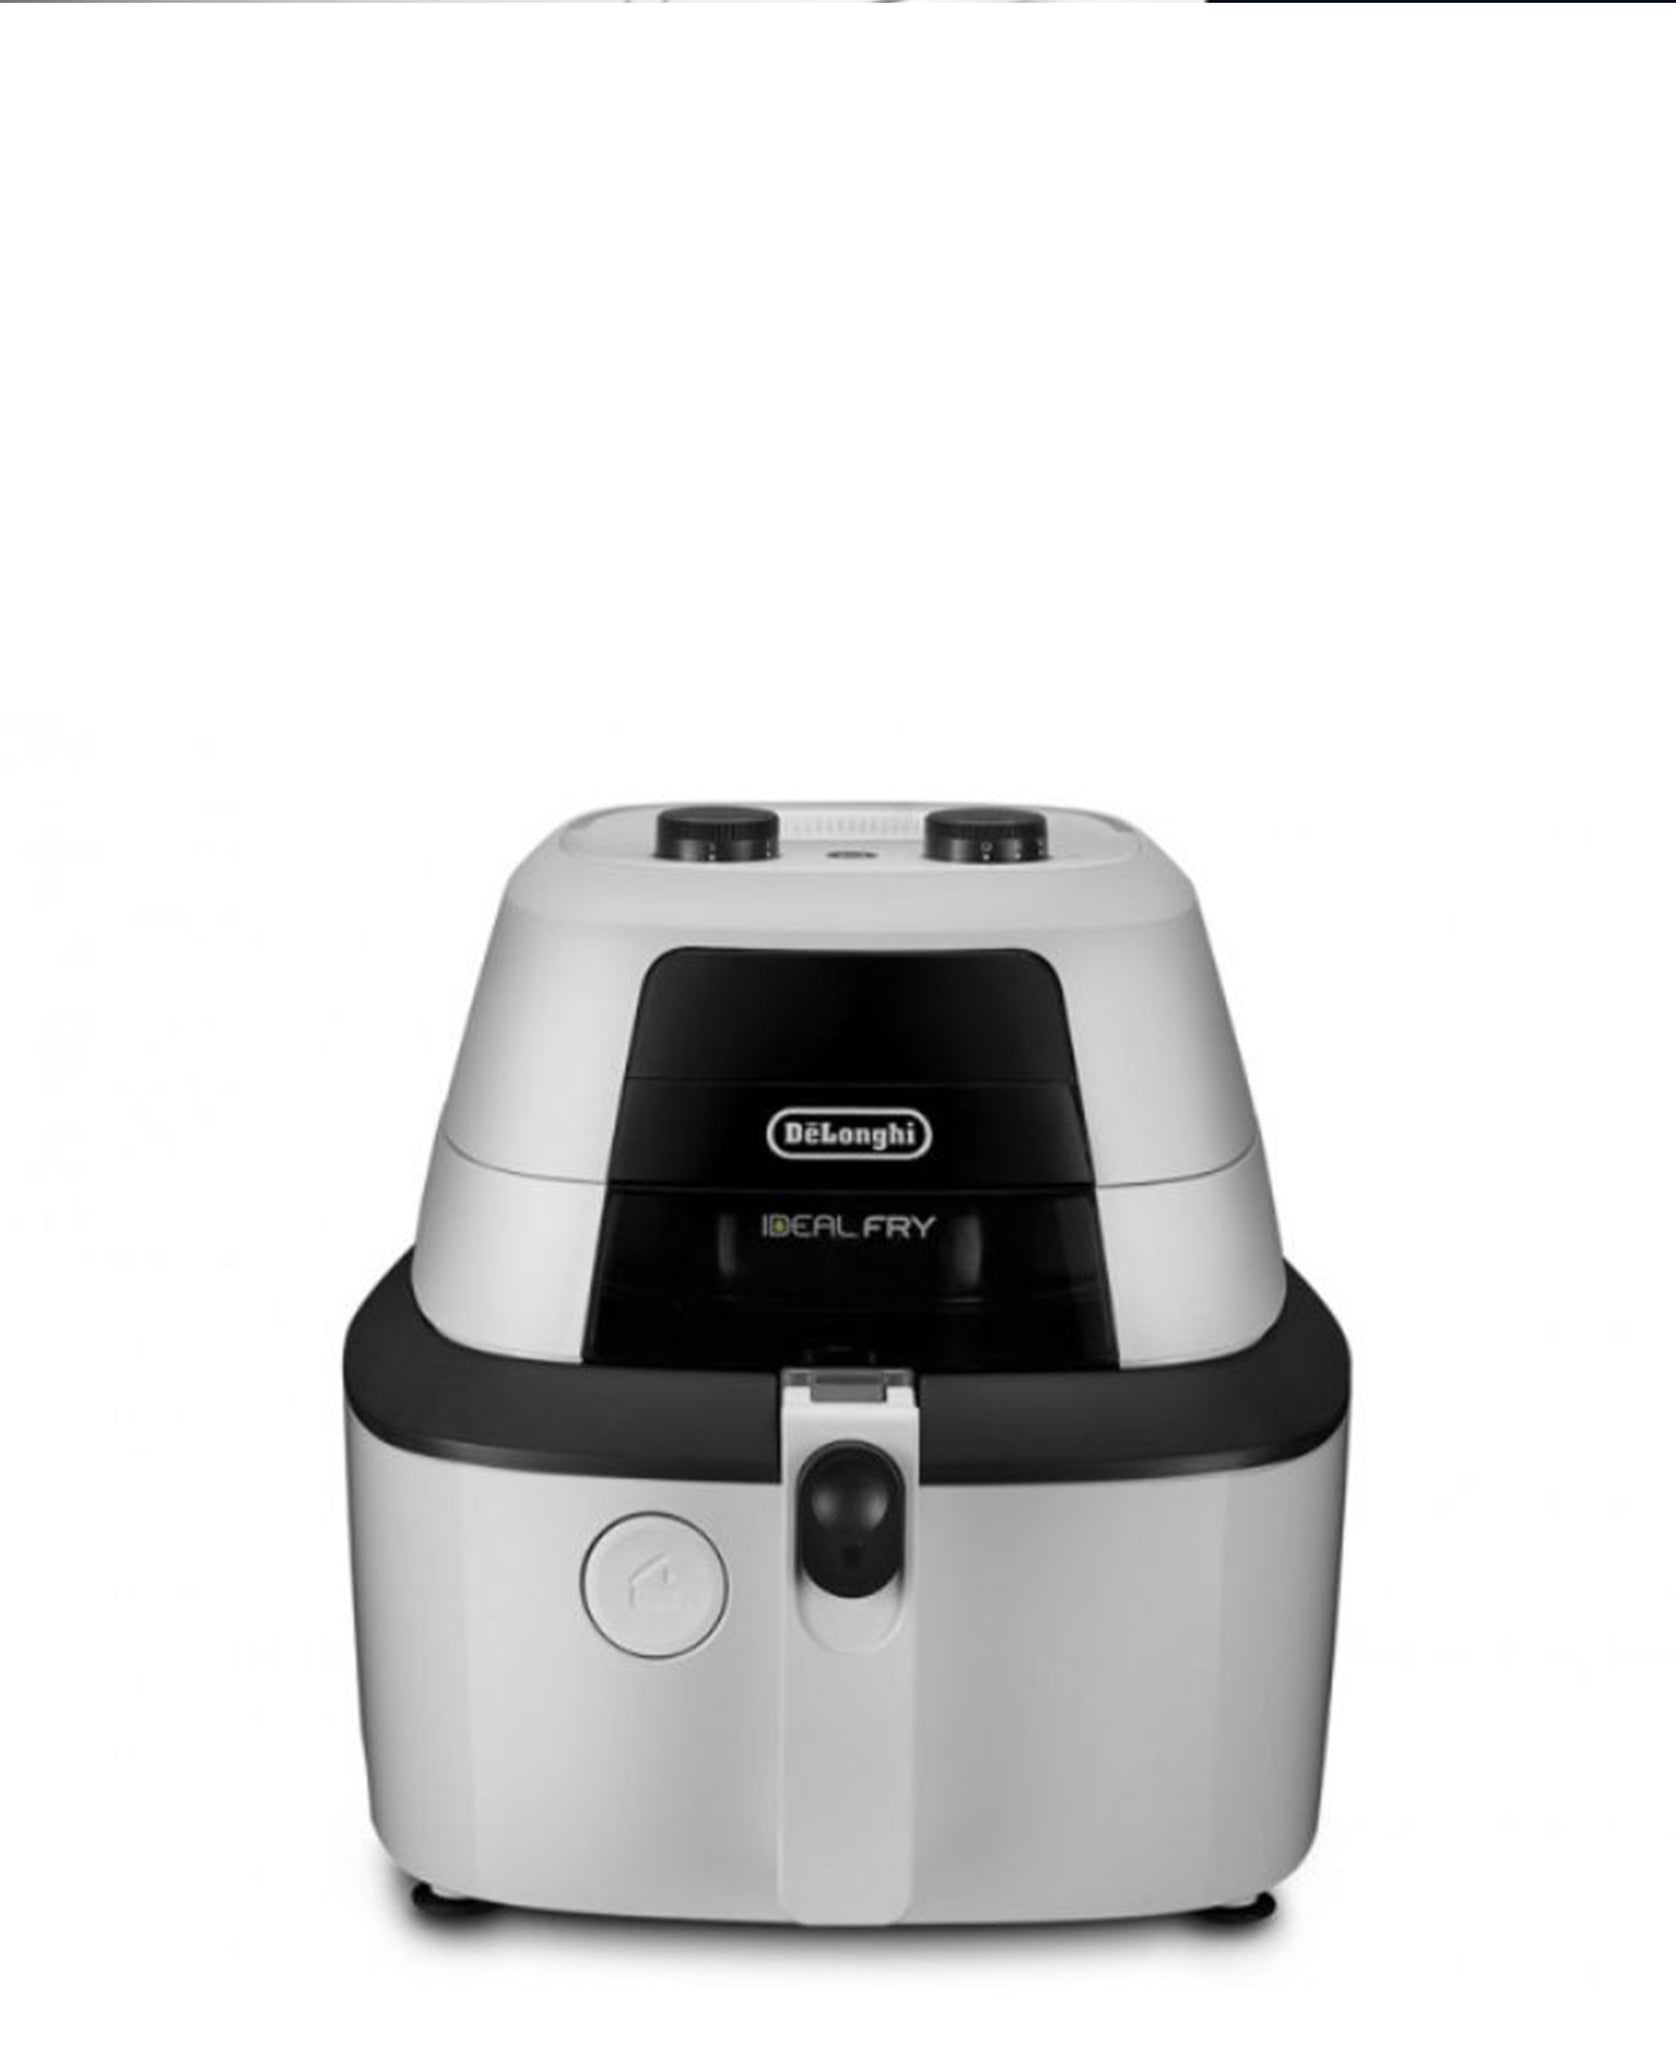 DeLonghi Ideal Fry Airfryer